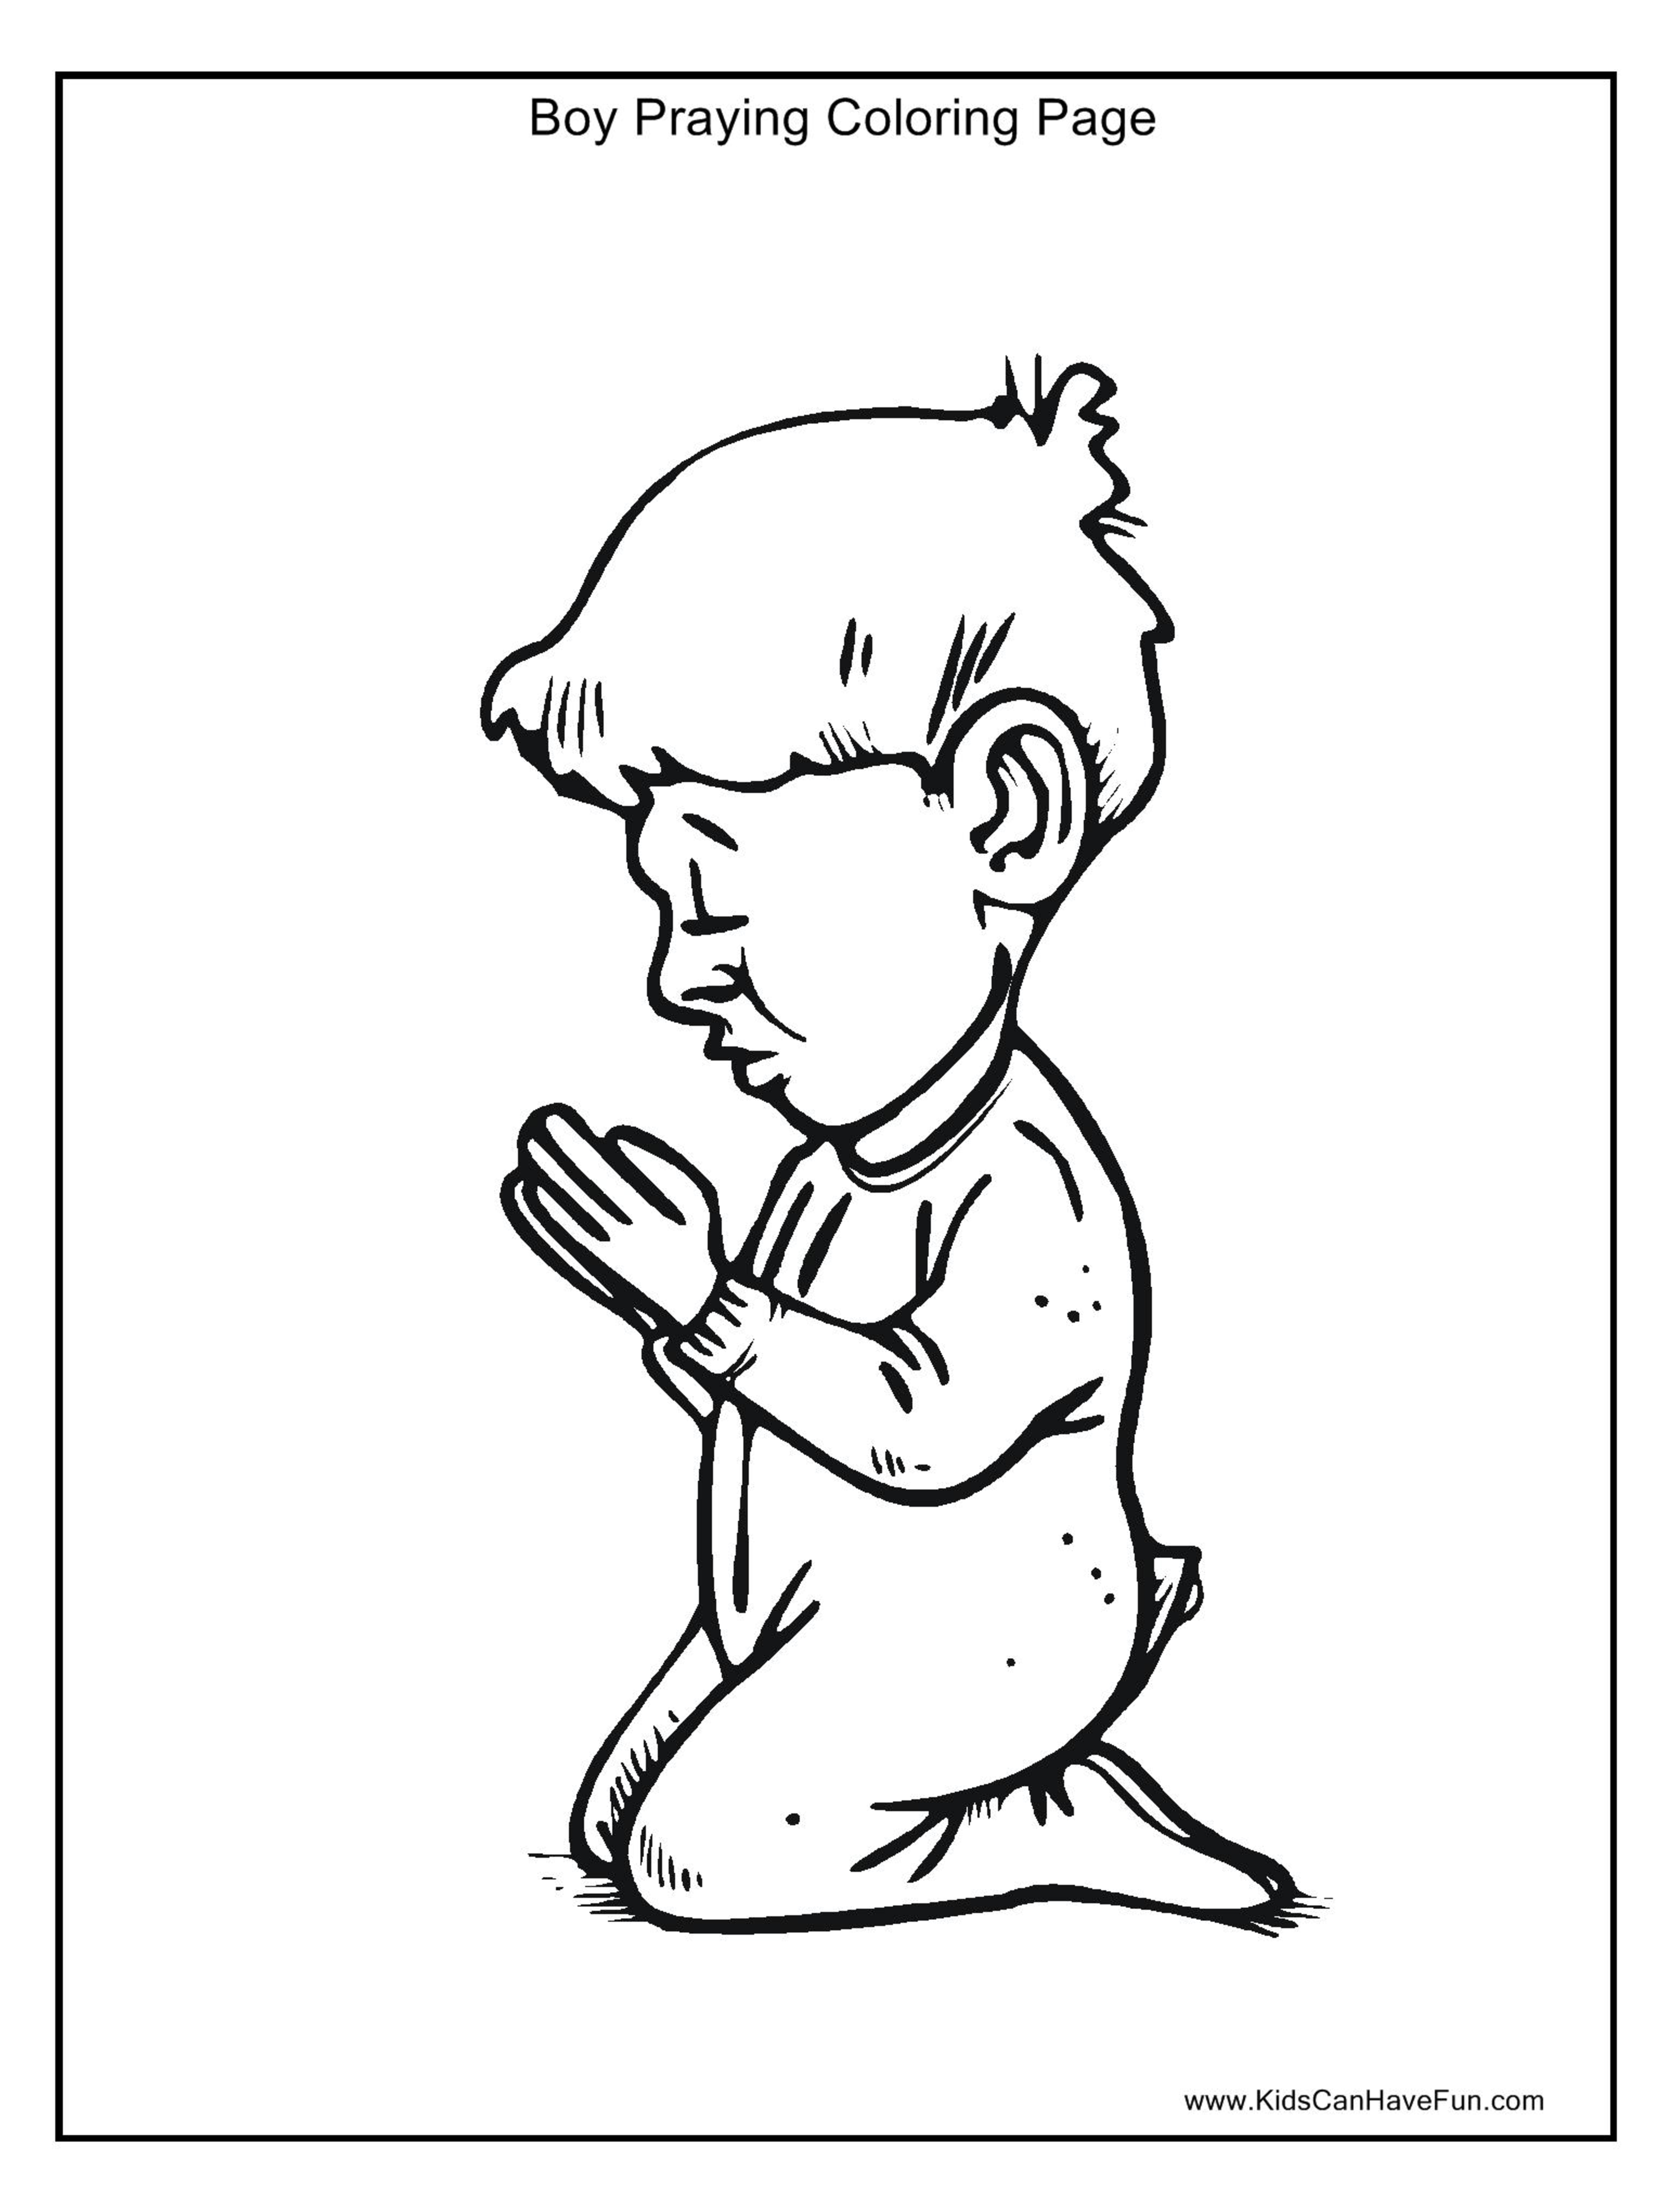 Coloring Page Of Boy Praying - High Quality Coloring Pages